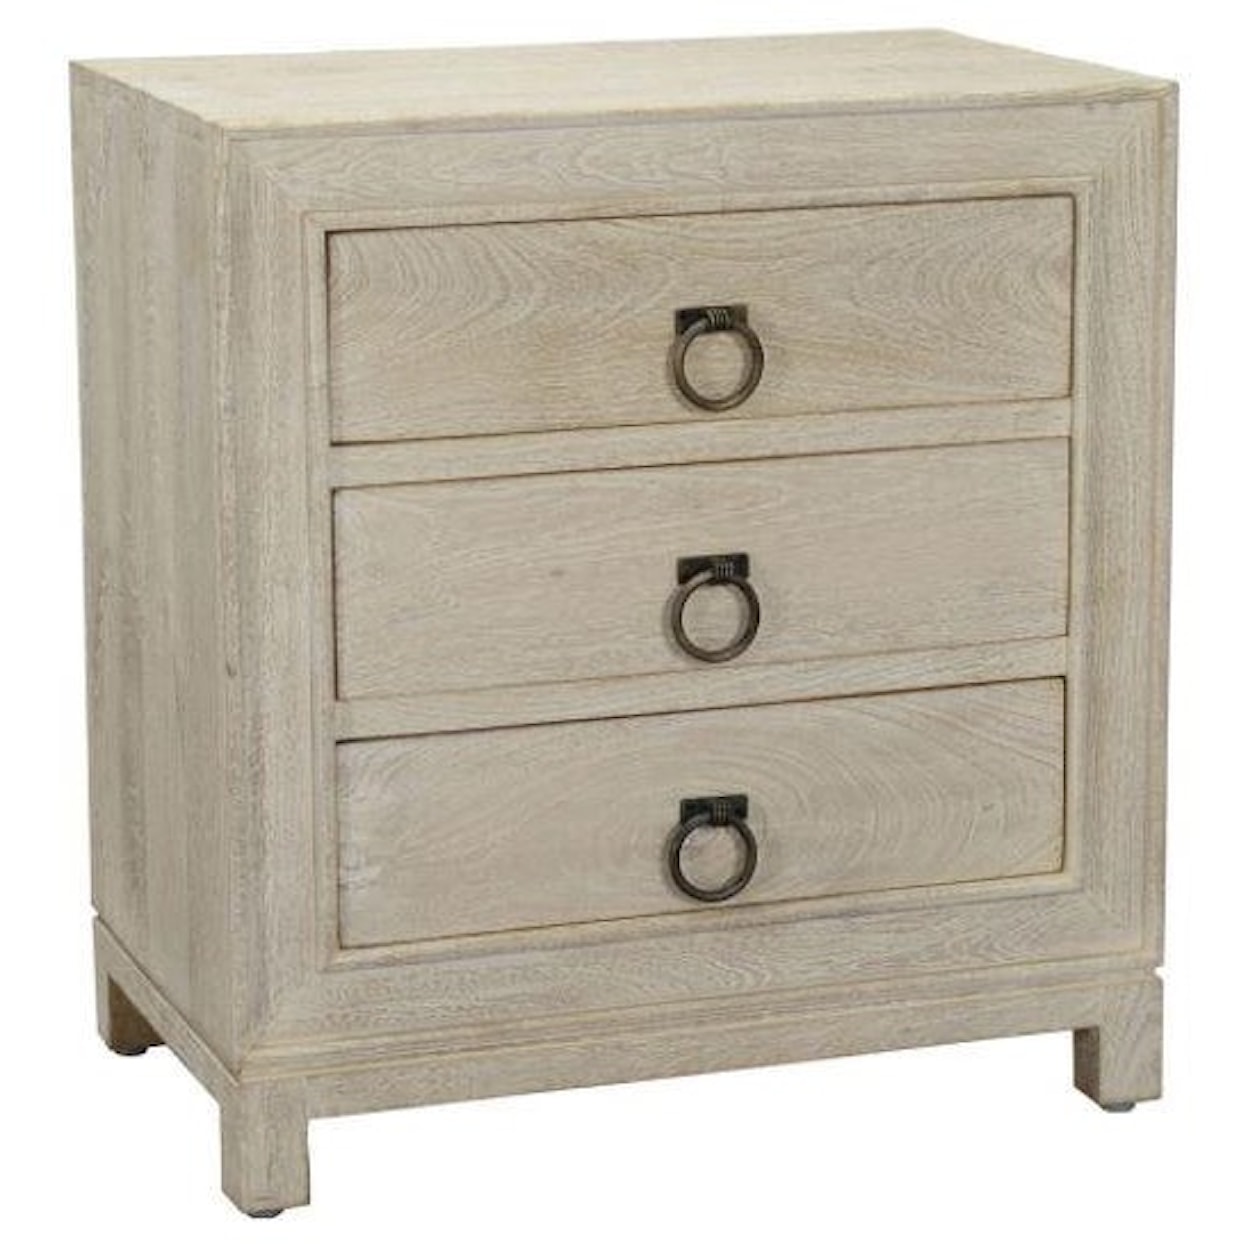 Classic Home Capetown CAPETOWN 3DWR NIGHTSTAND